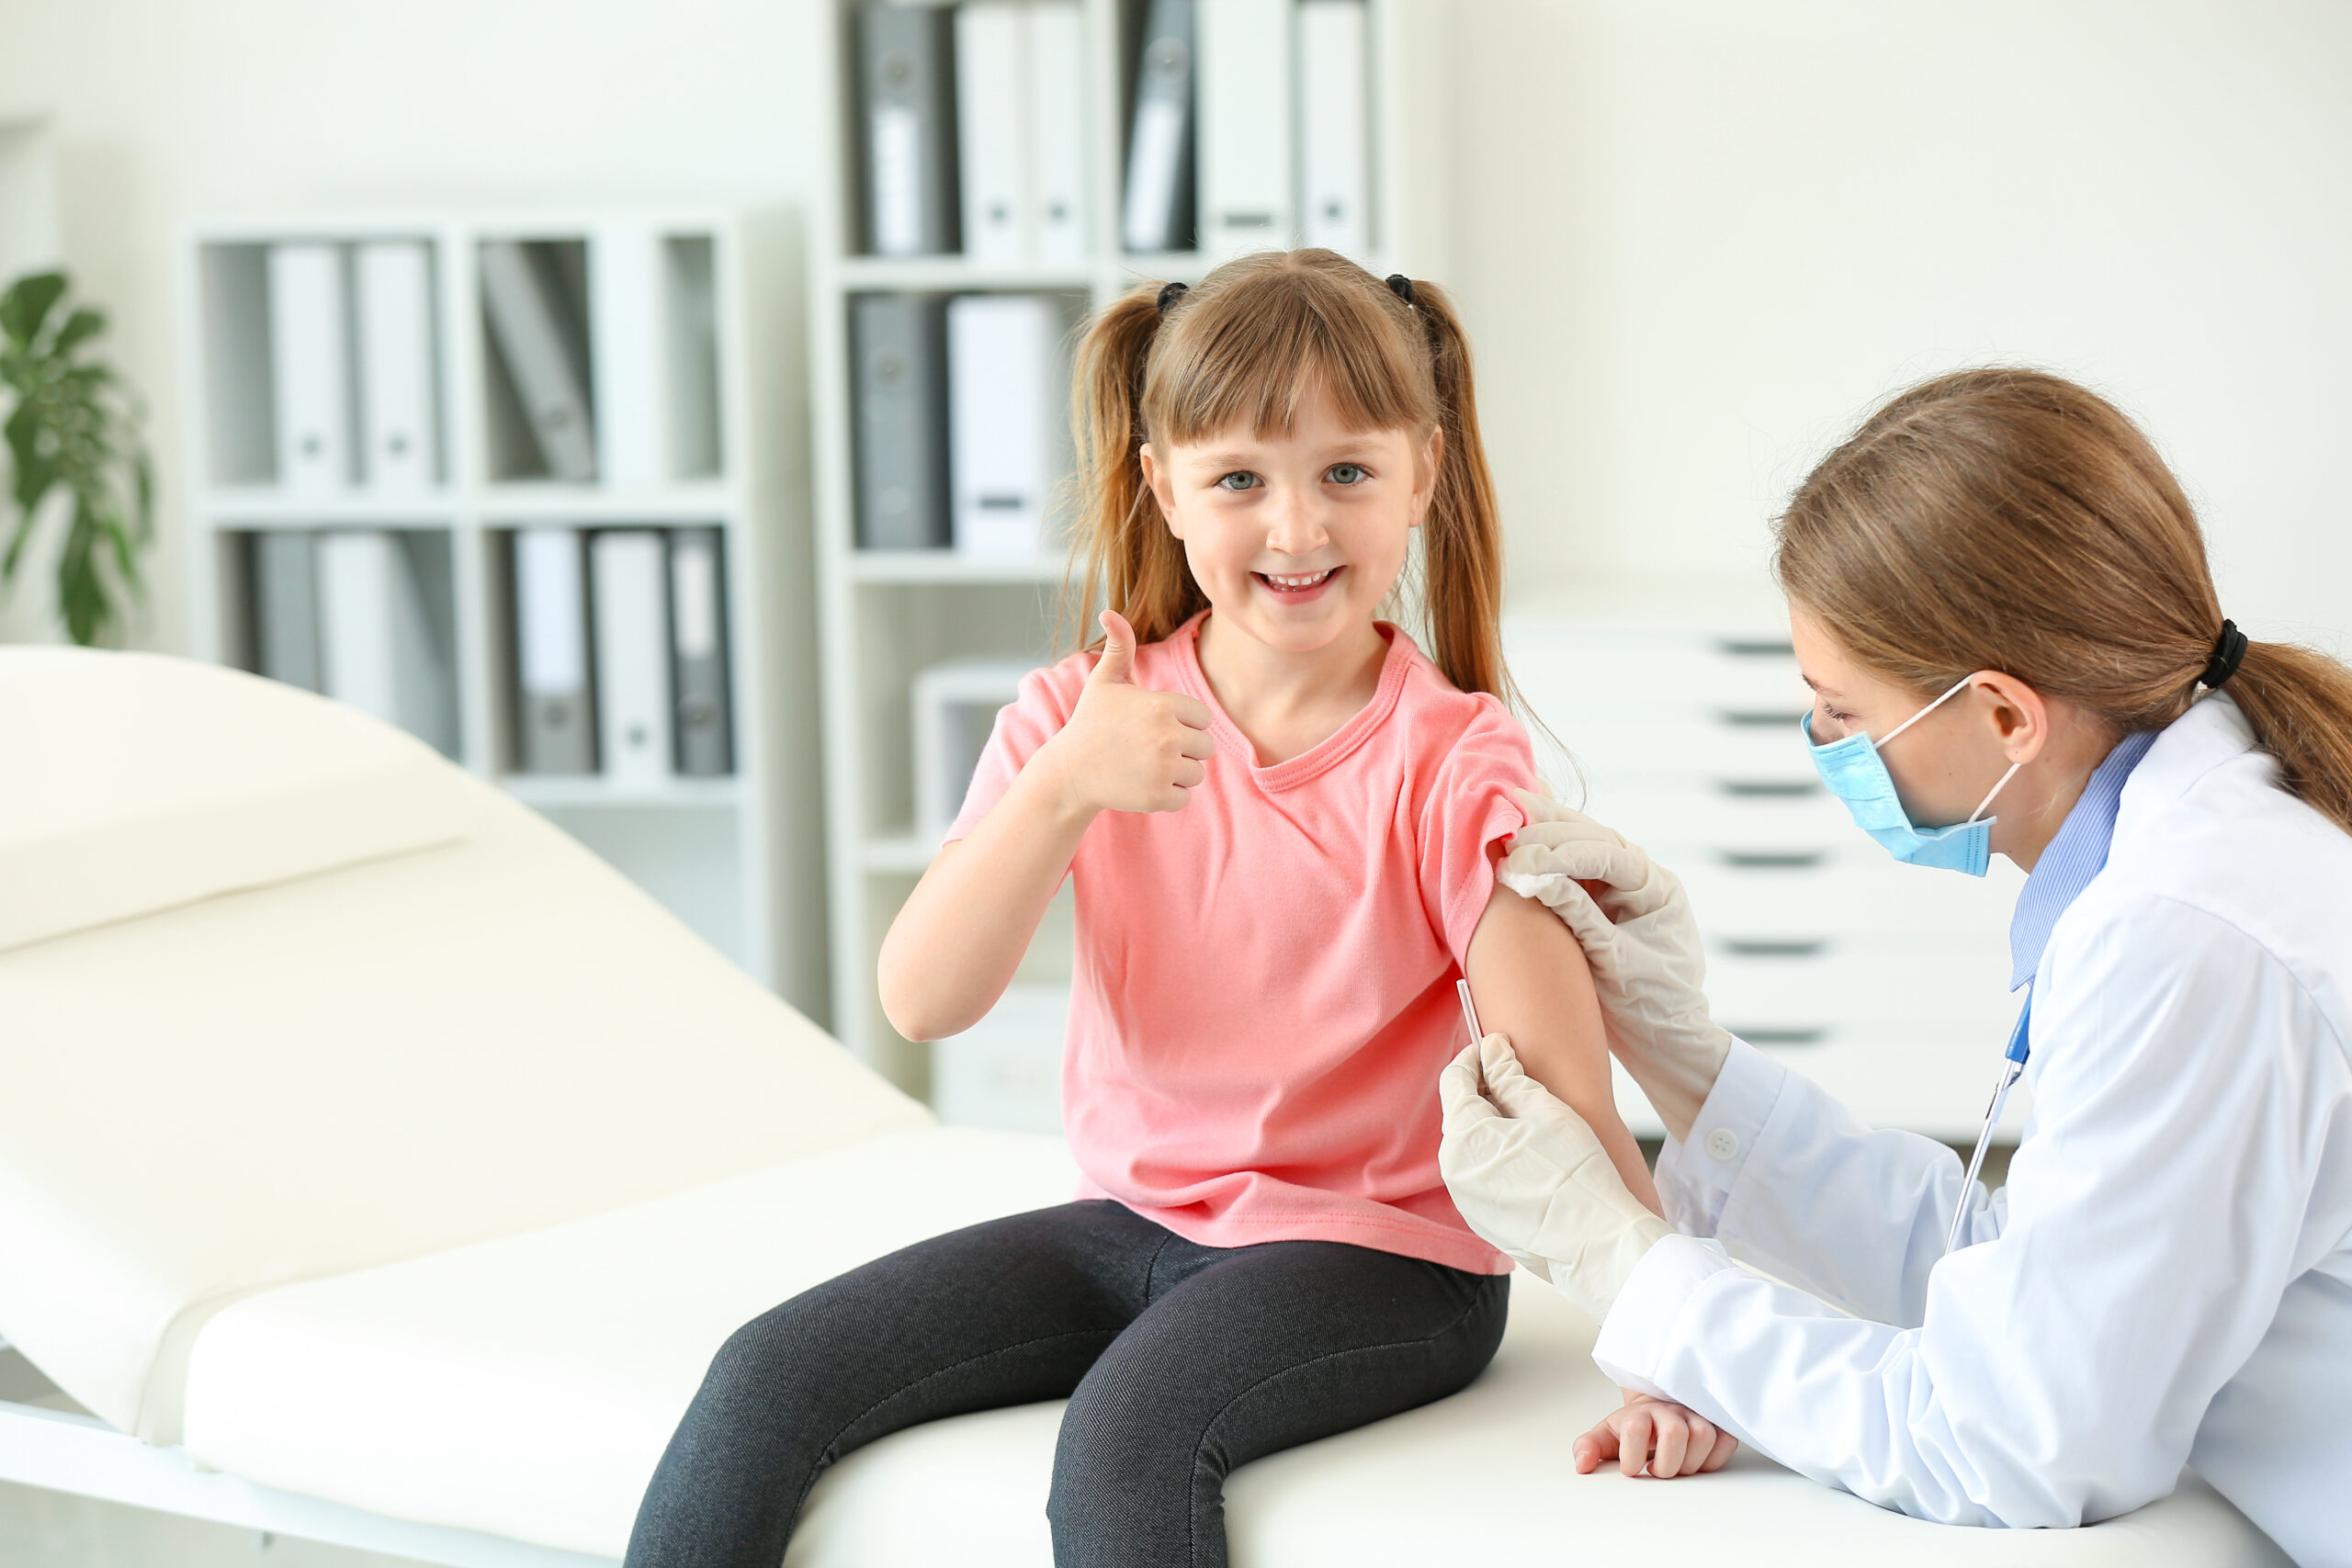 Little girl smiling getting a bandaid put on her arm by a doctor